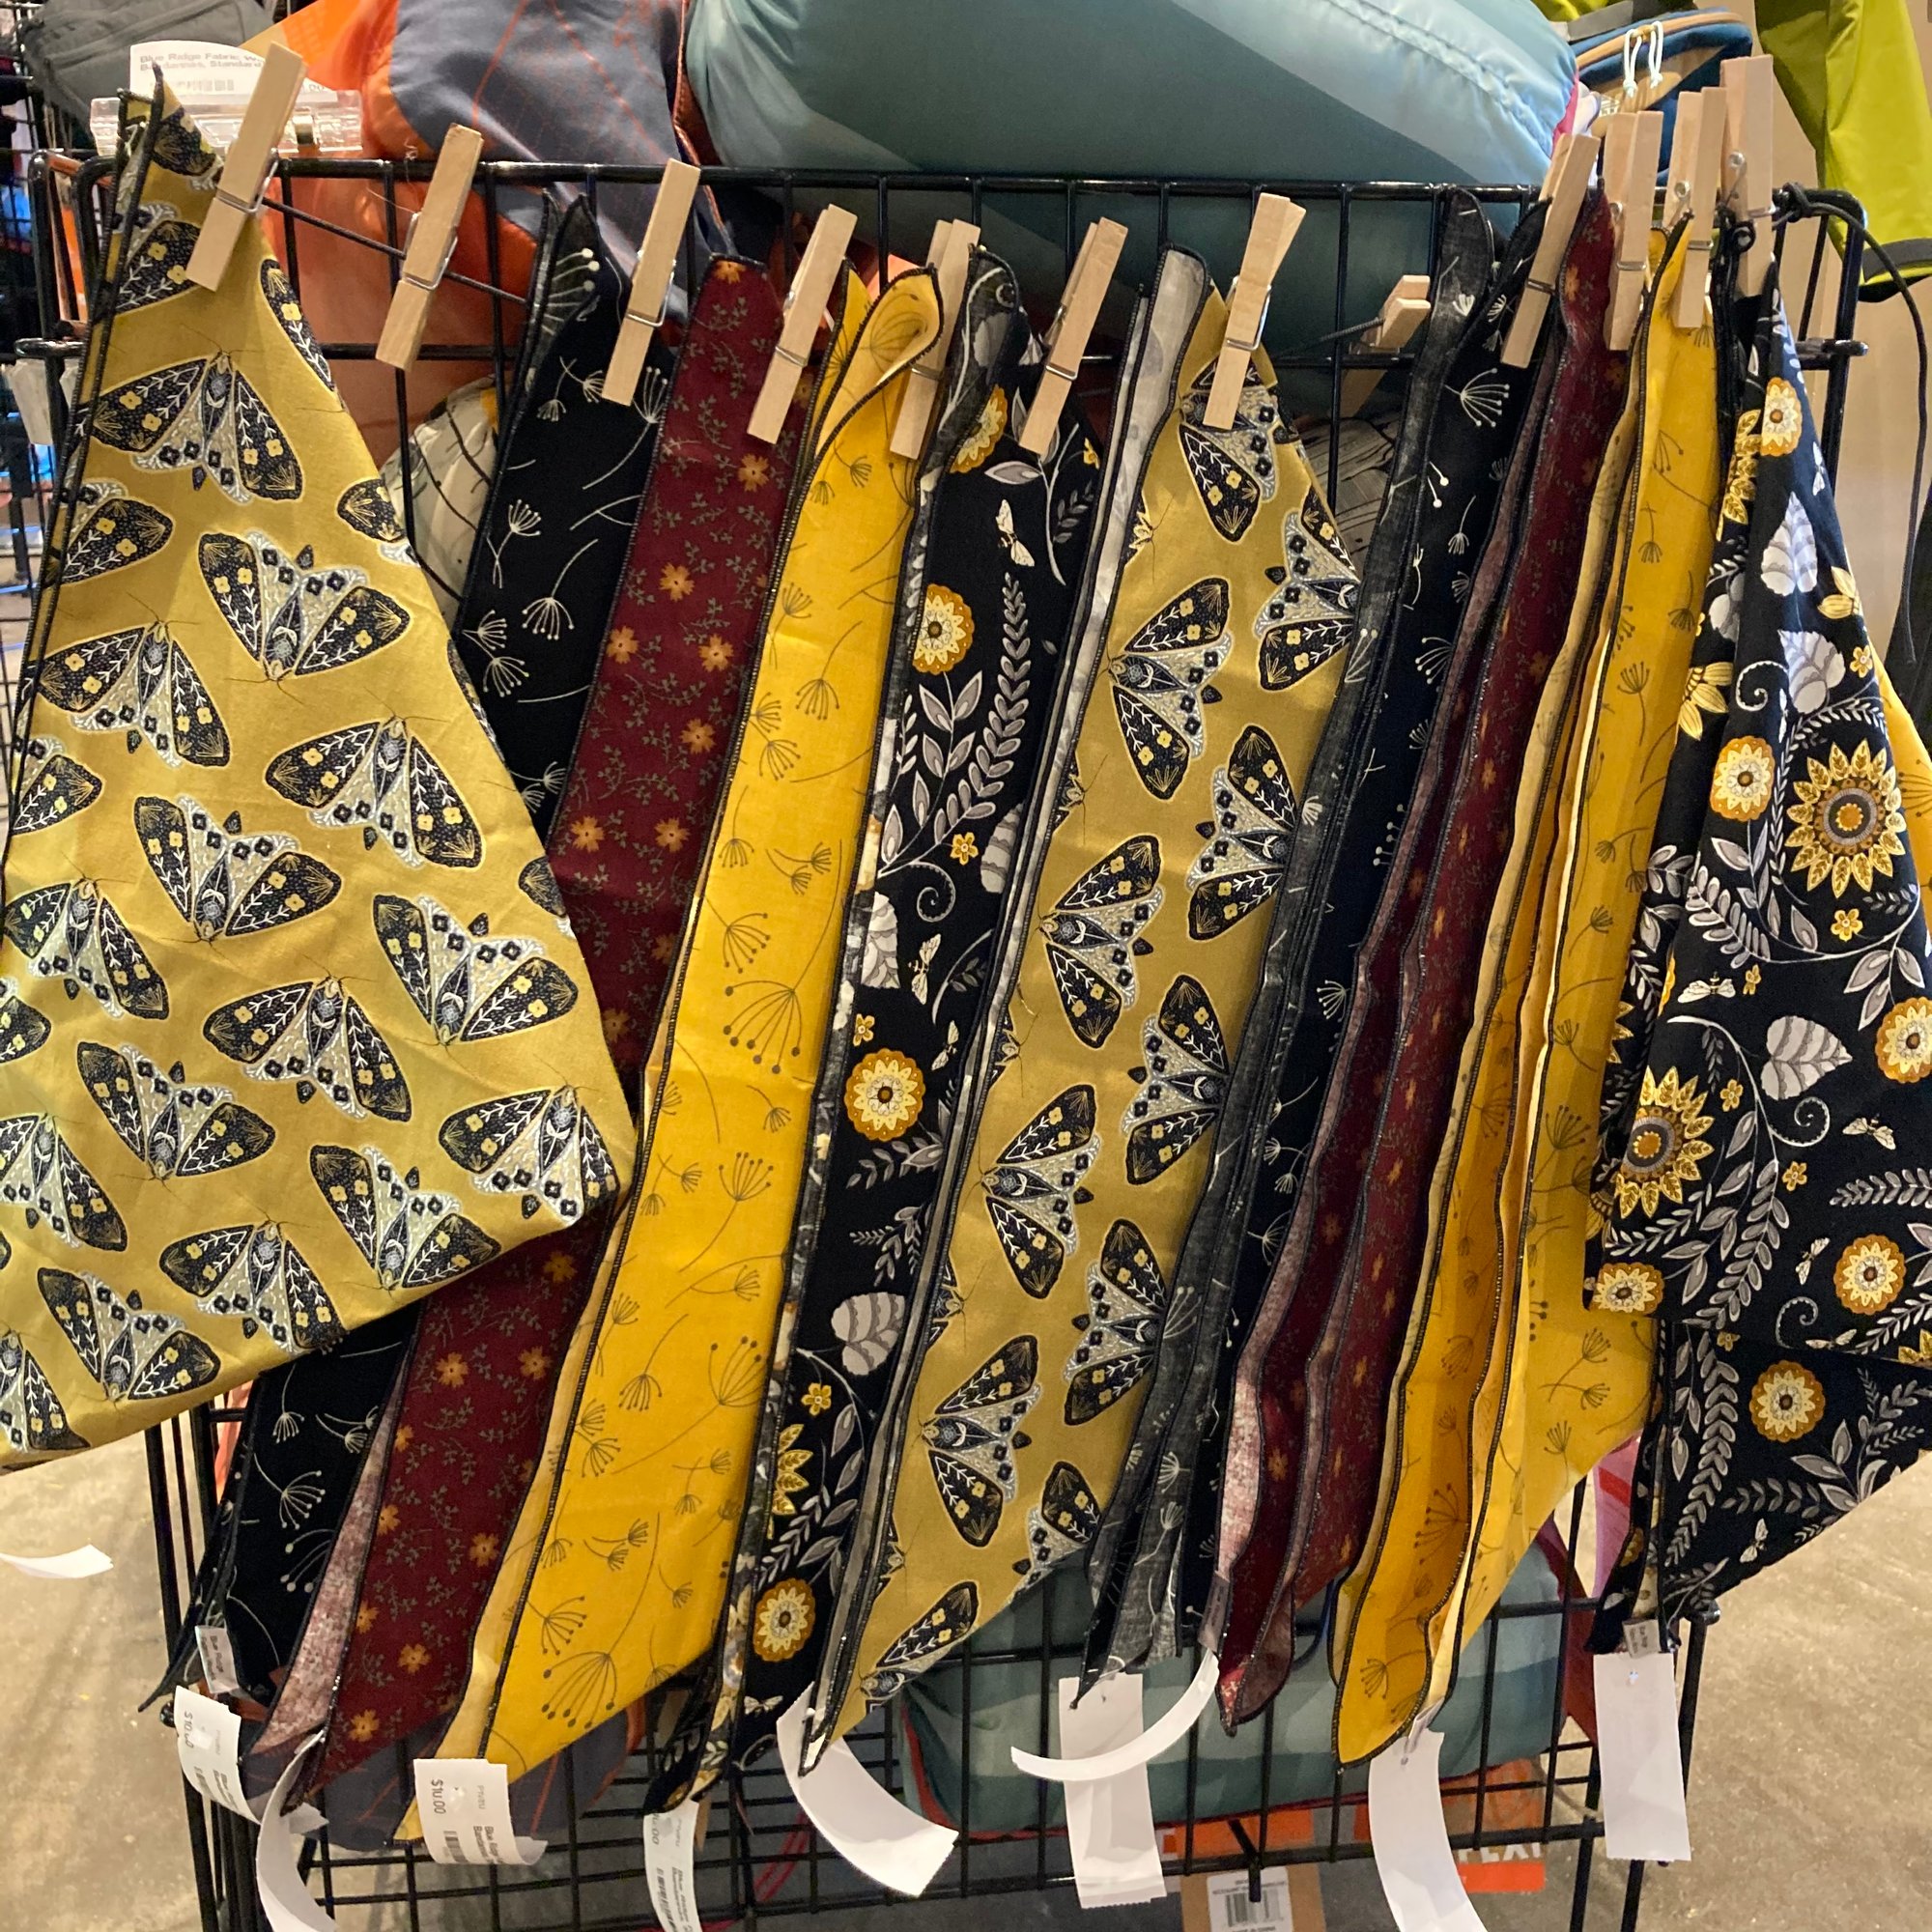 An image of a variety of colorful bandanas hanging on a display.